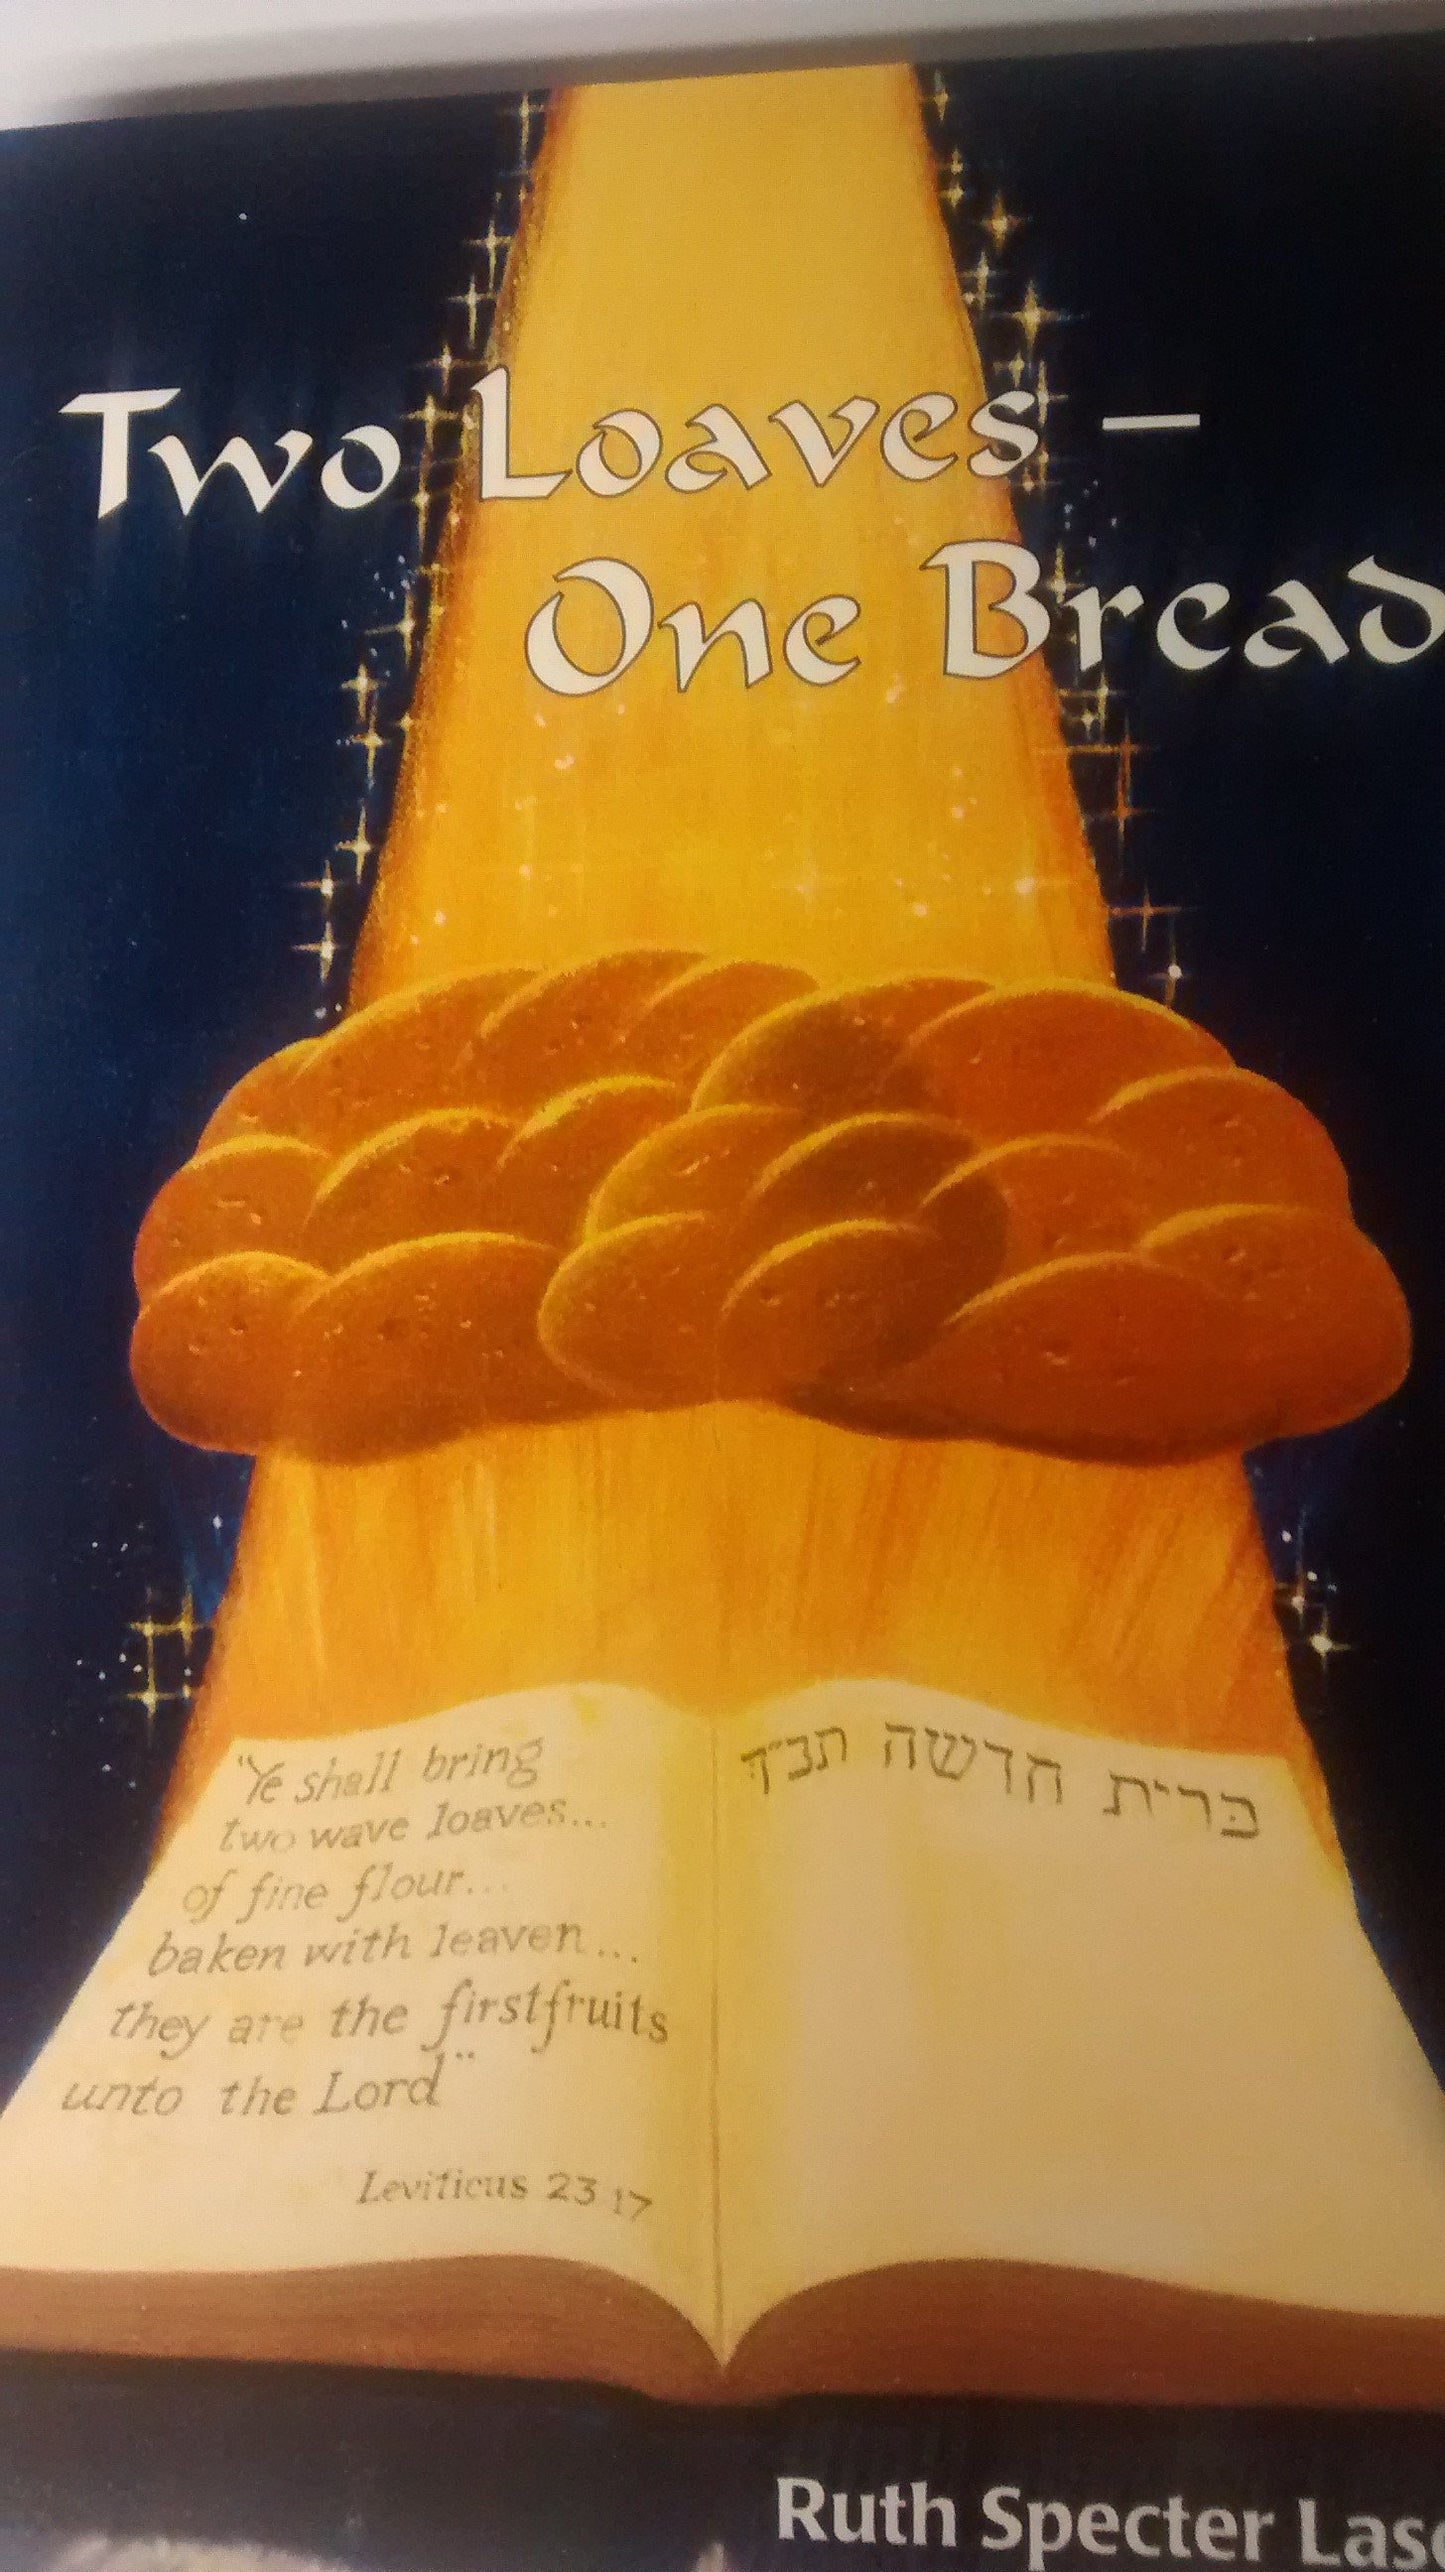 Two Loaves - One Bread - CLOSEOUT - Rock of Israel 